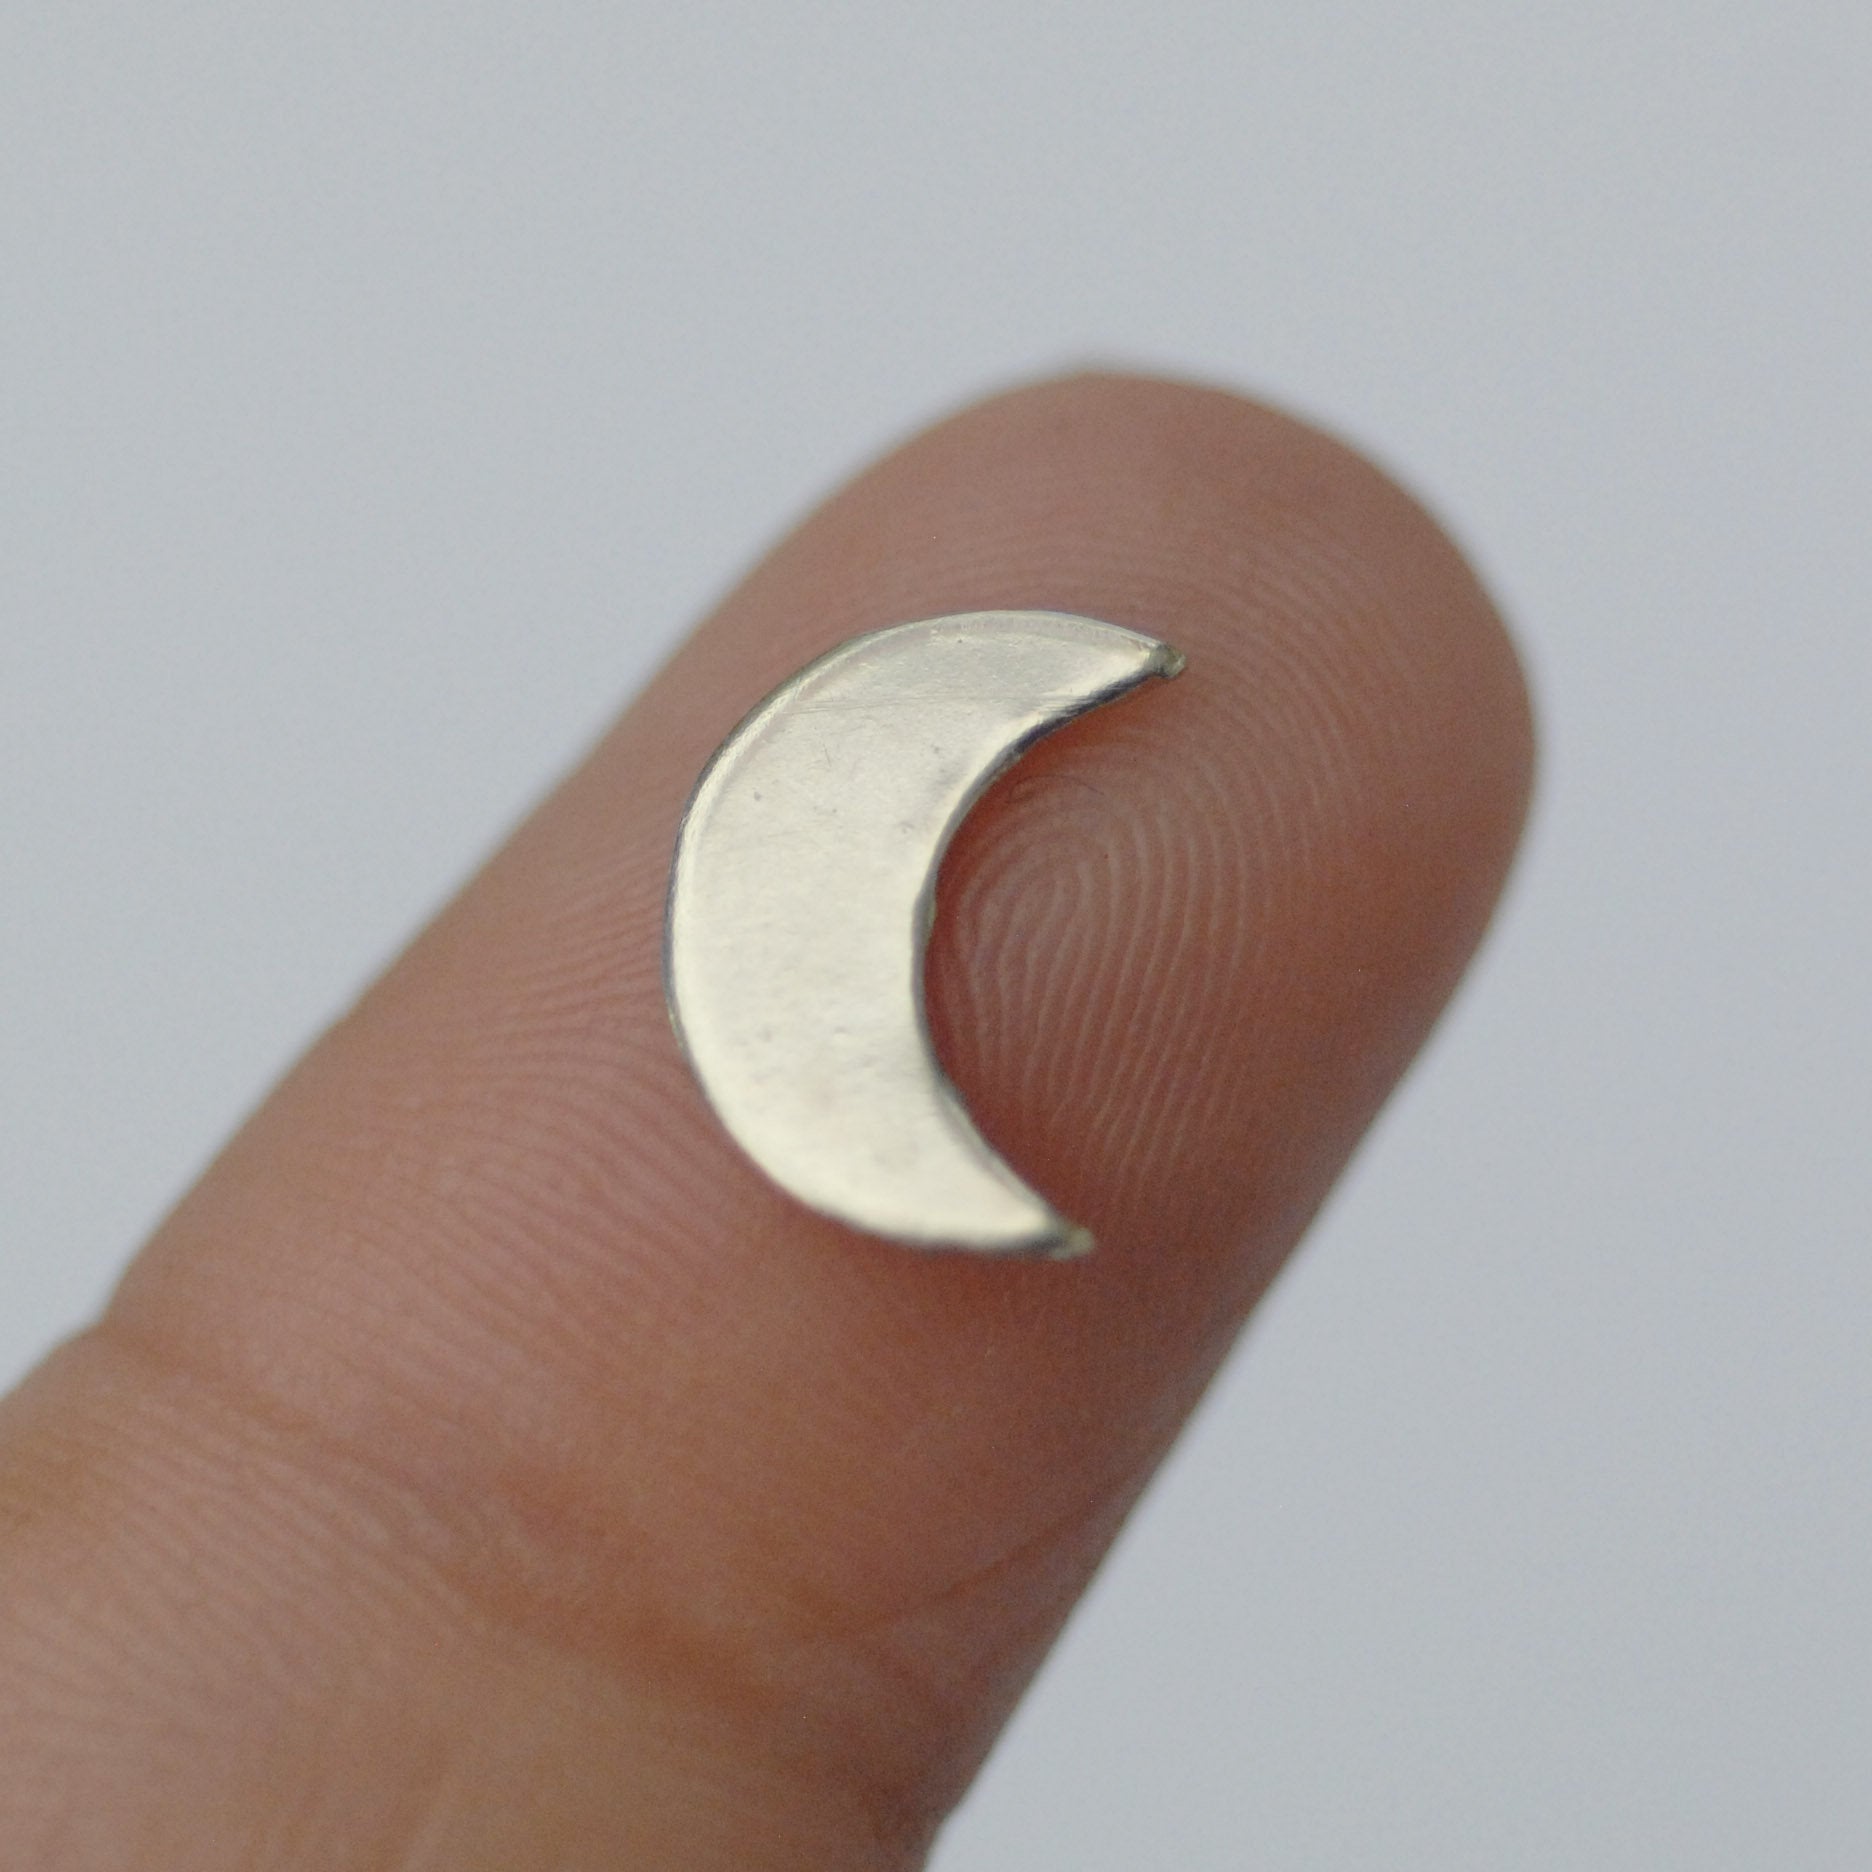 Blank Tiny Shape Crecent Moon 10mm x 8mm 22g or Enameling Tiny Blanks for Jewelry Making Soldering Blanks - 8 pieces Mini shape